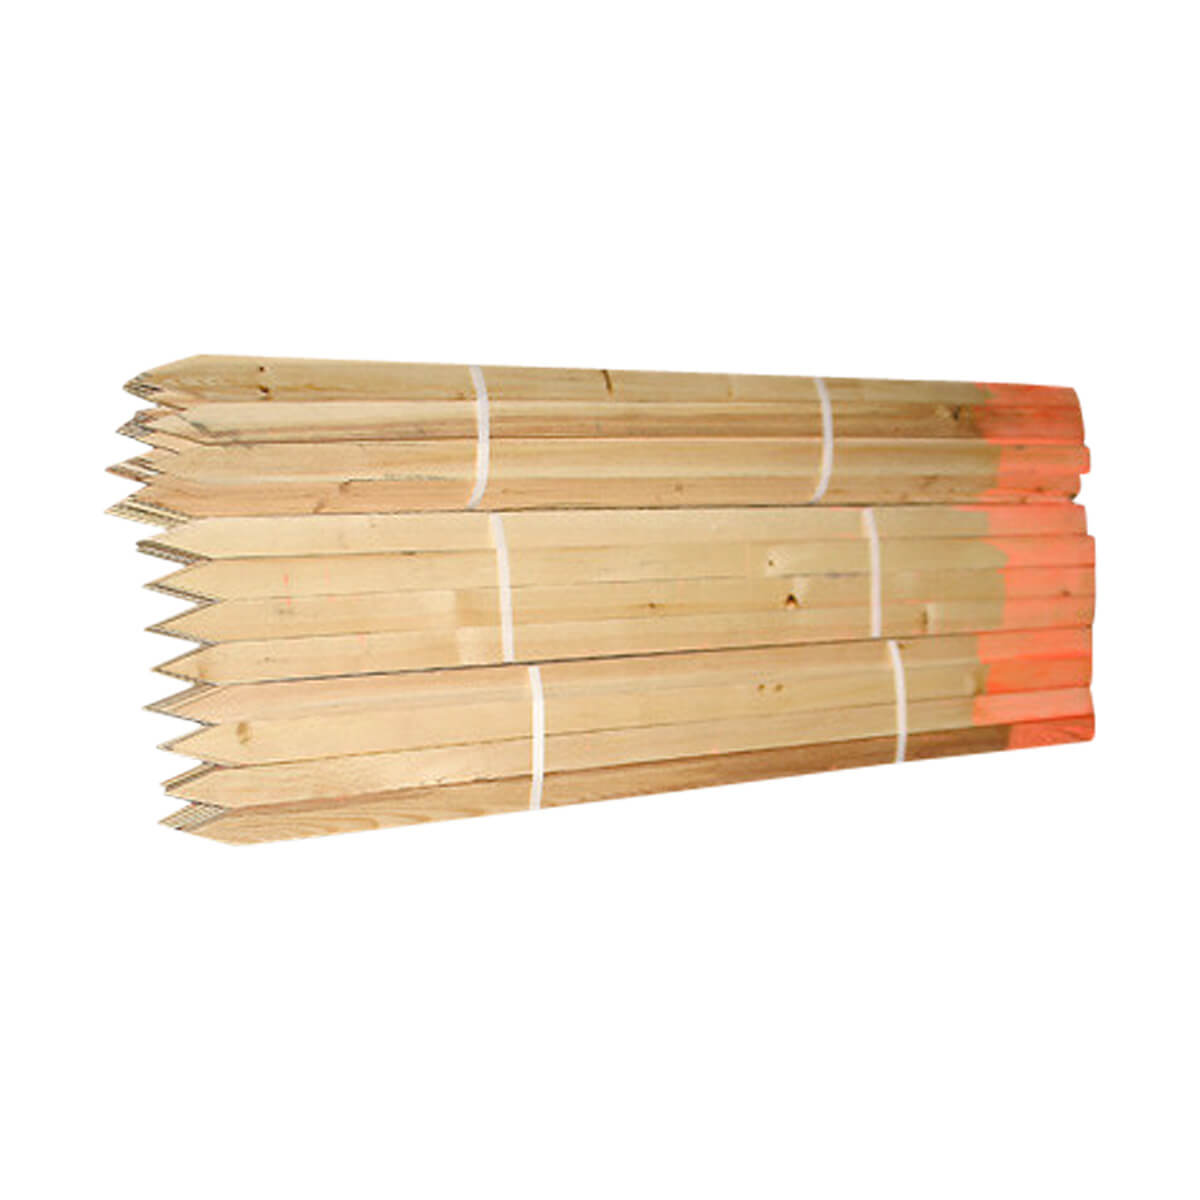 Sharpened Painted Lath - 3/8-in x 48-in - Orange Top